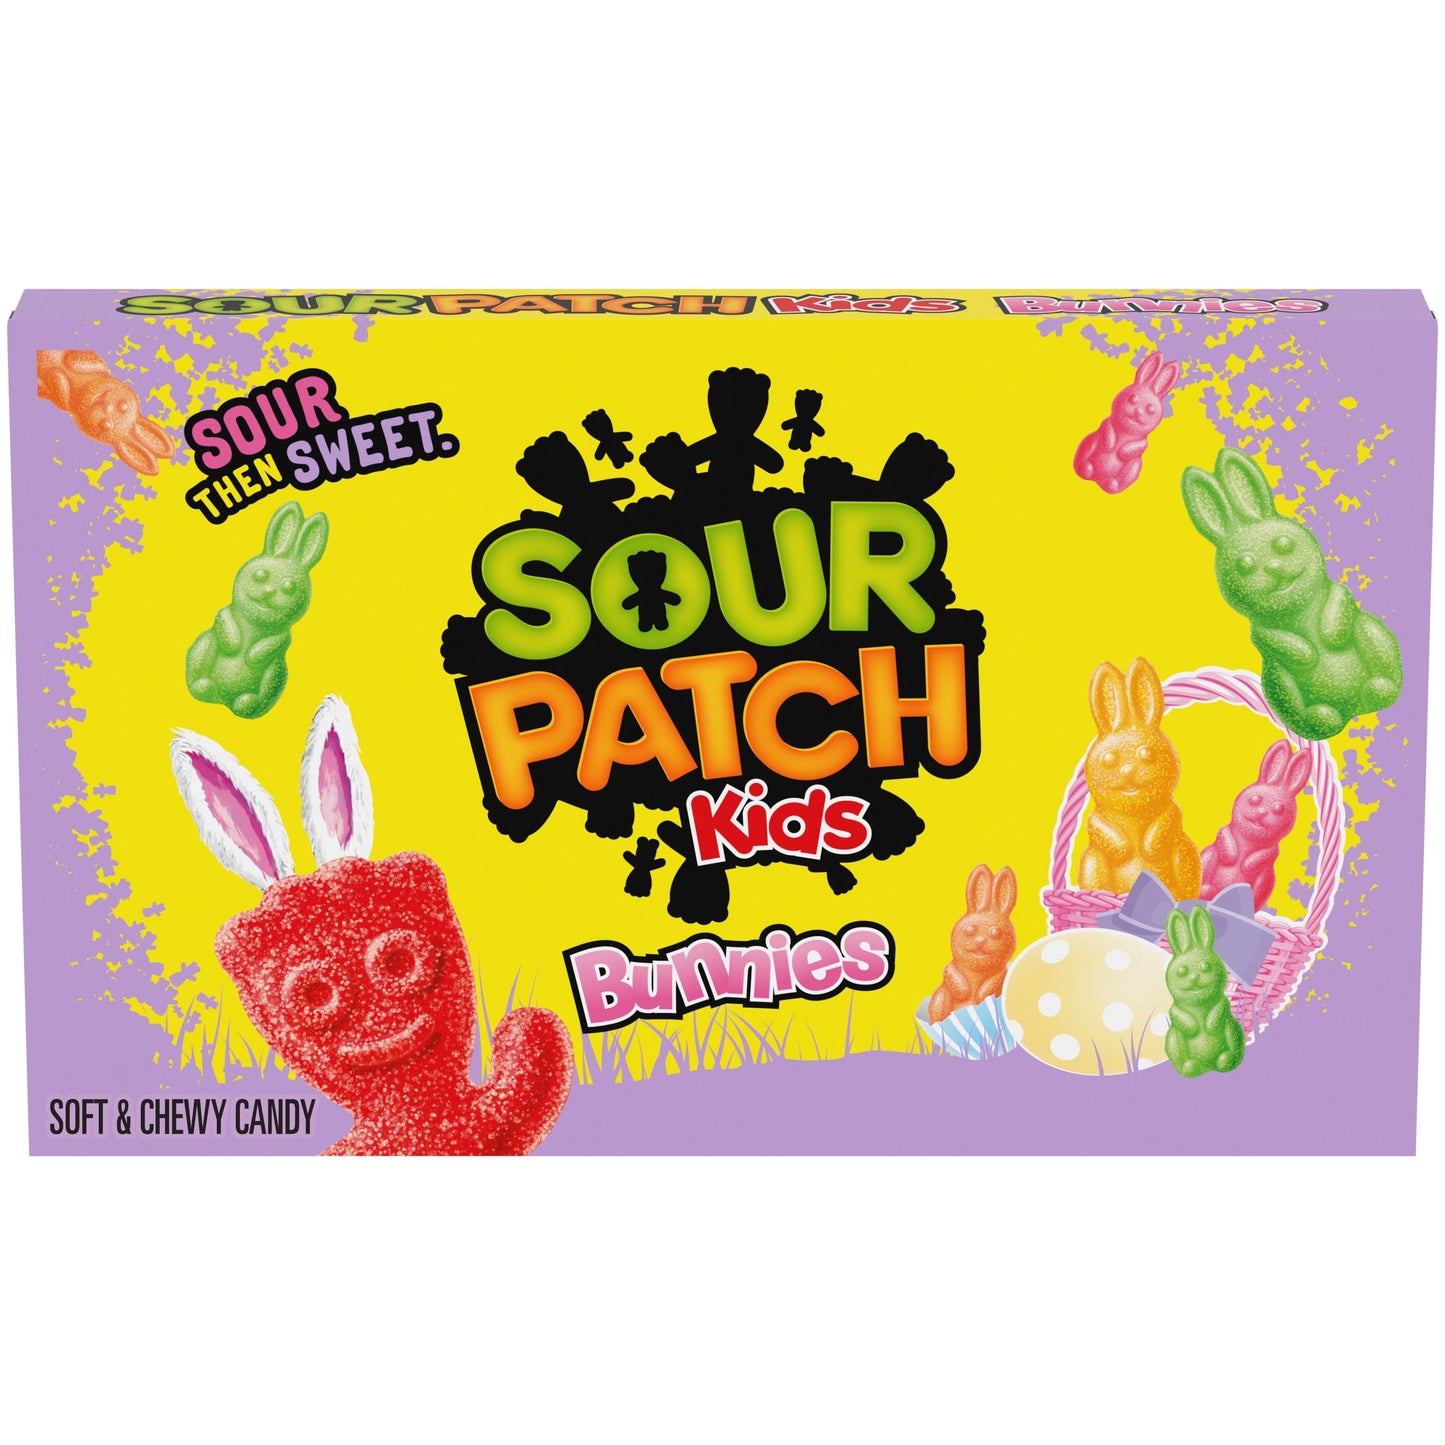 Bunnies Soft & Chewy Easter Candy, 3.1 Oz